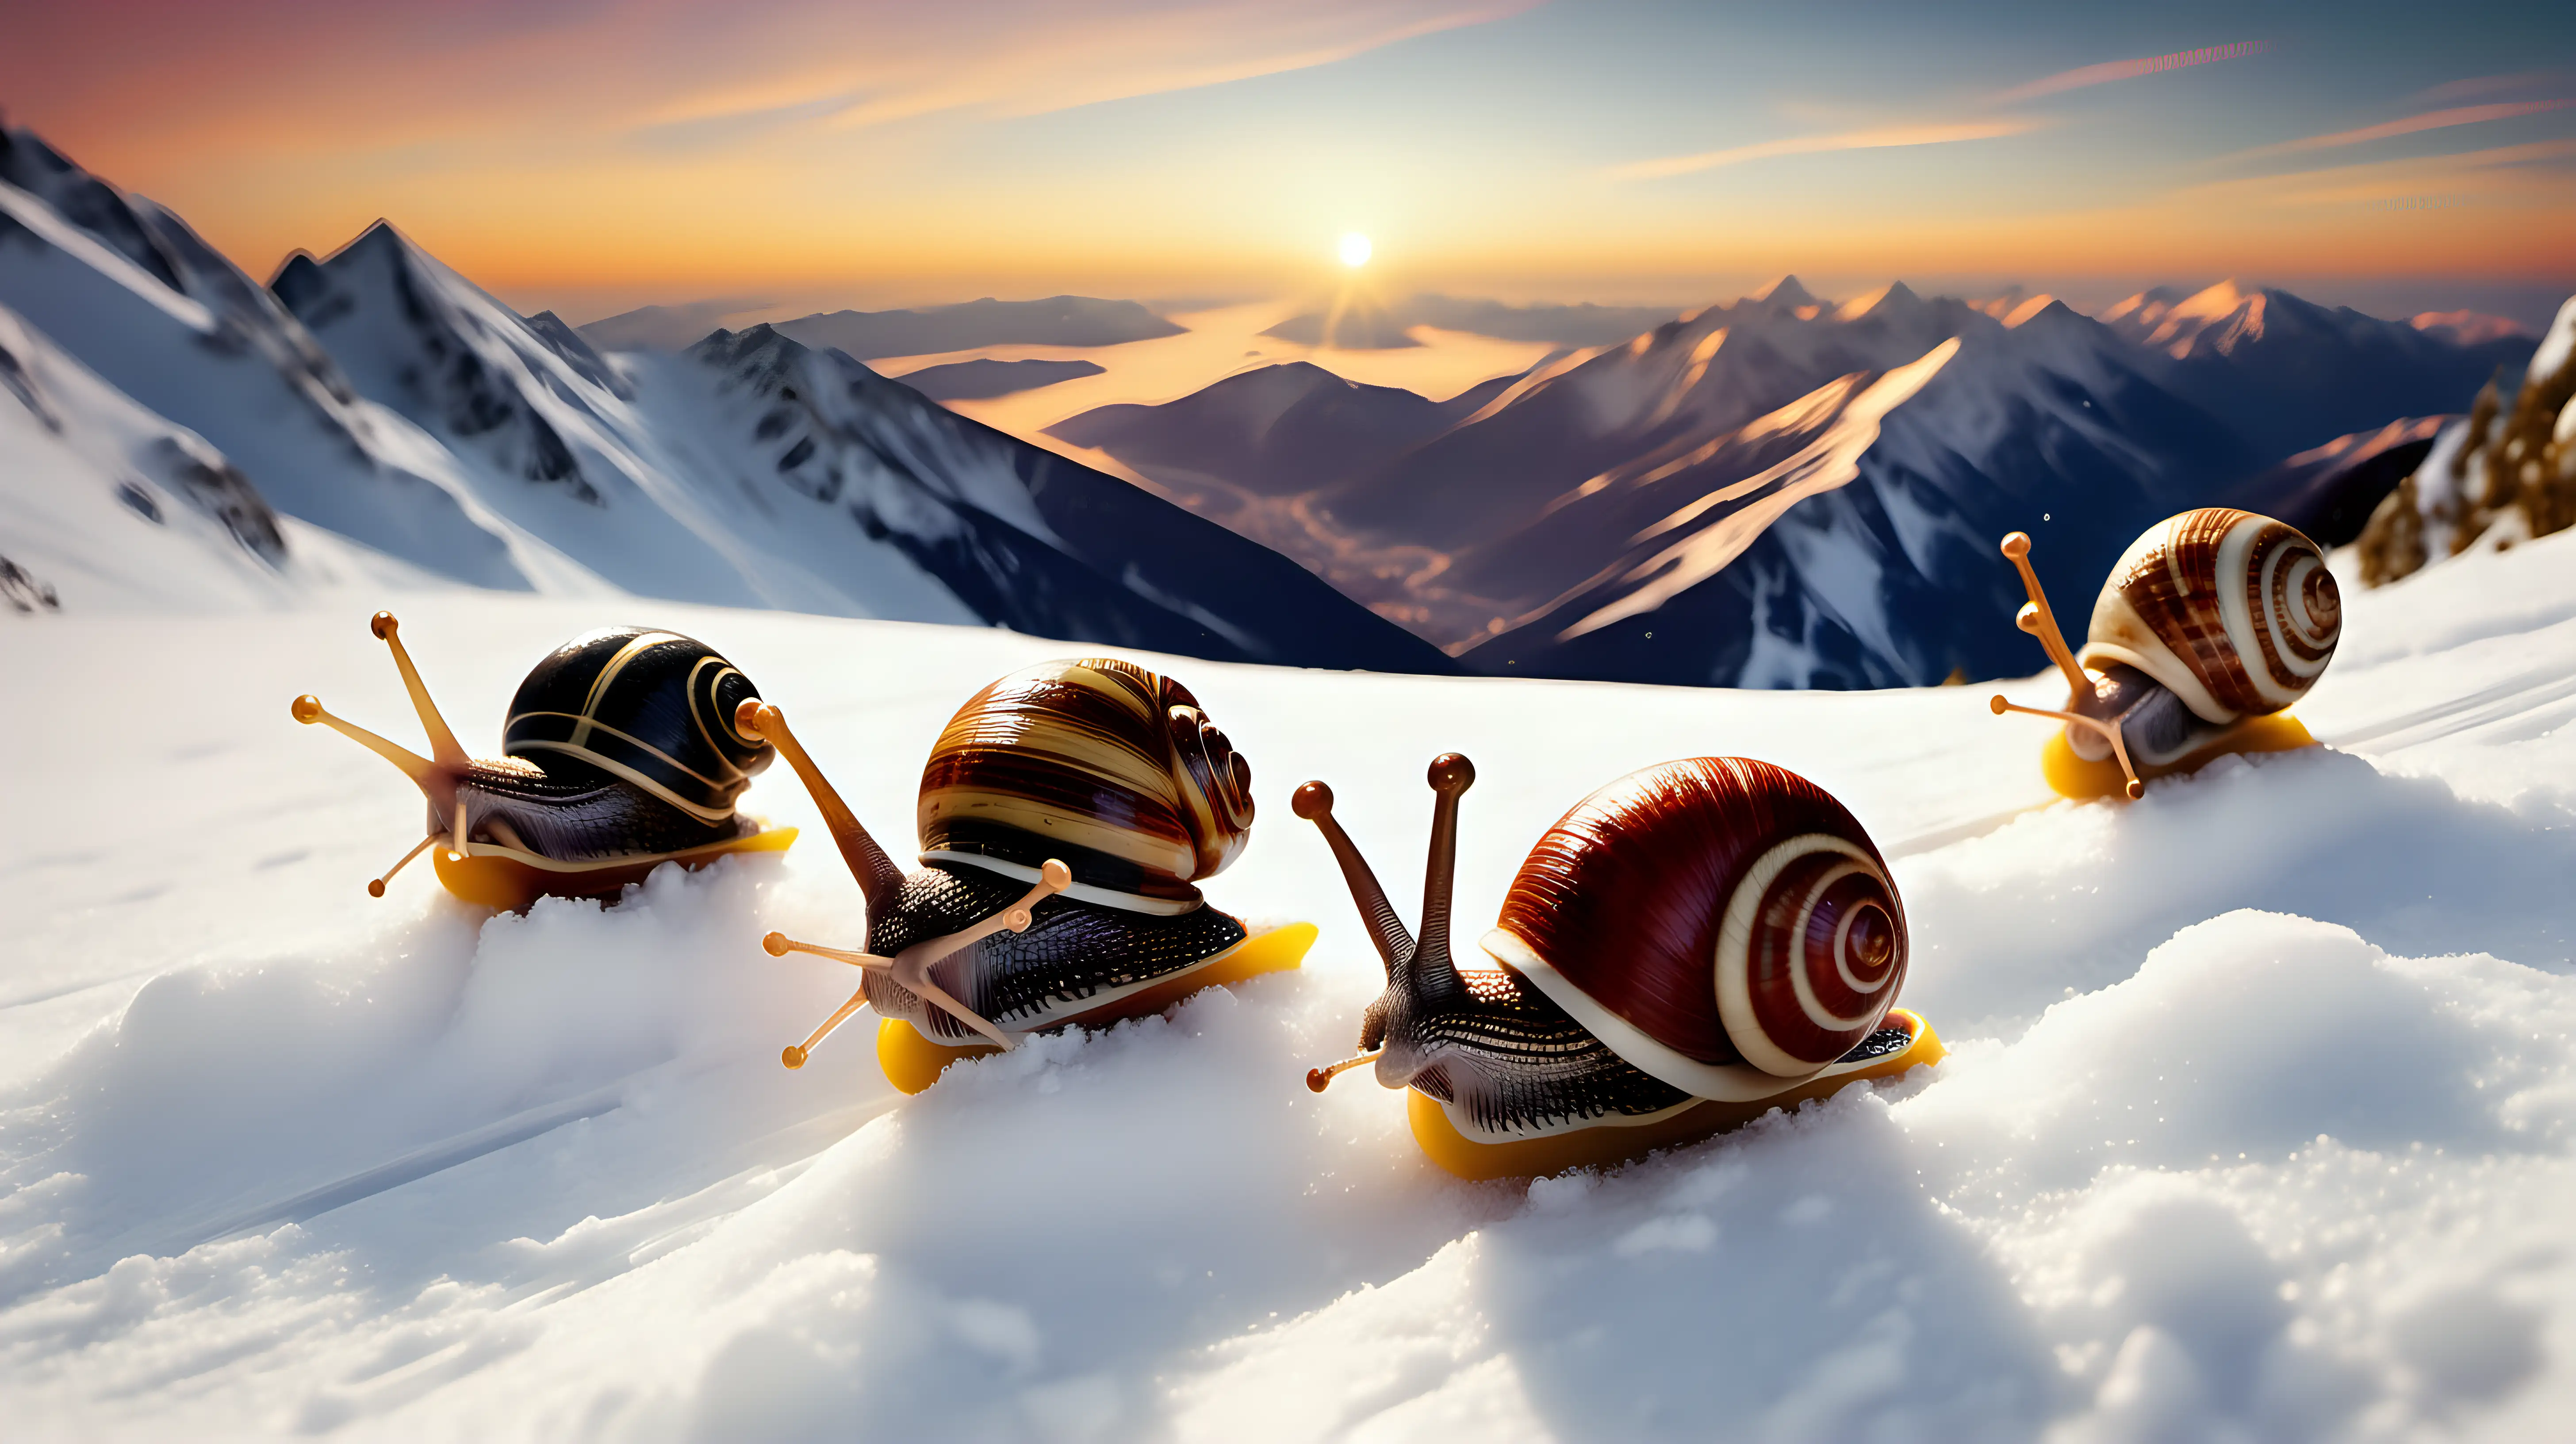 Adventurous French Snails Downhill Skiing at Sunset